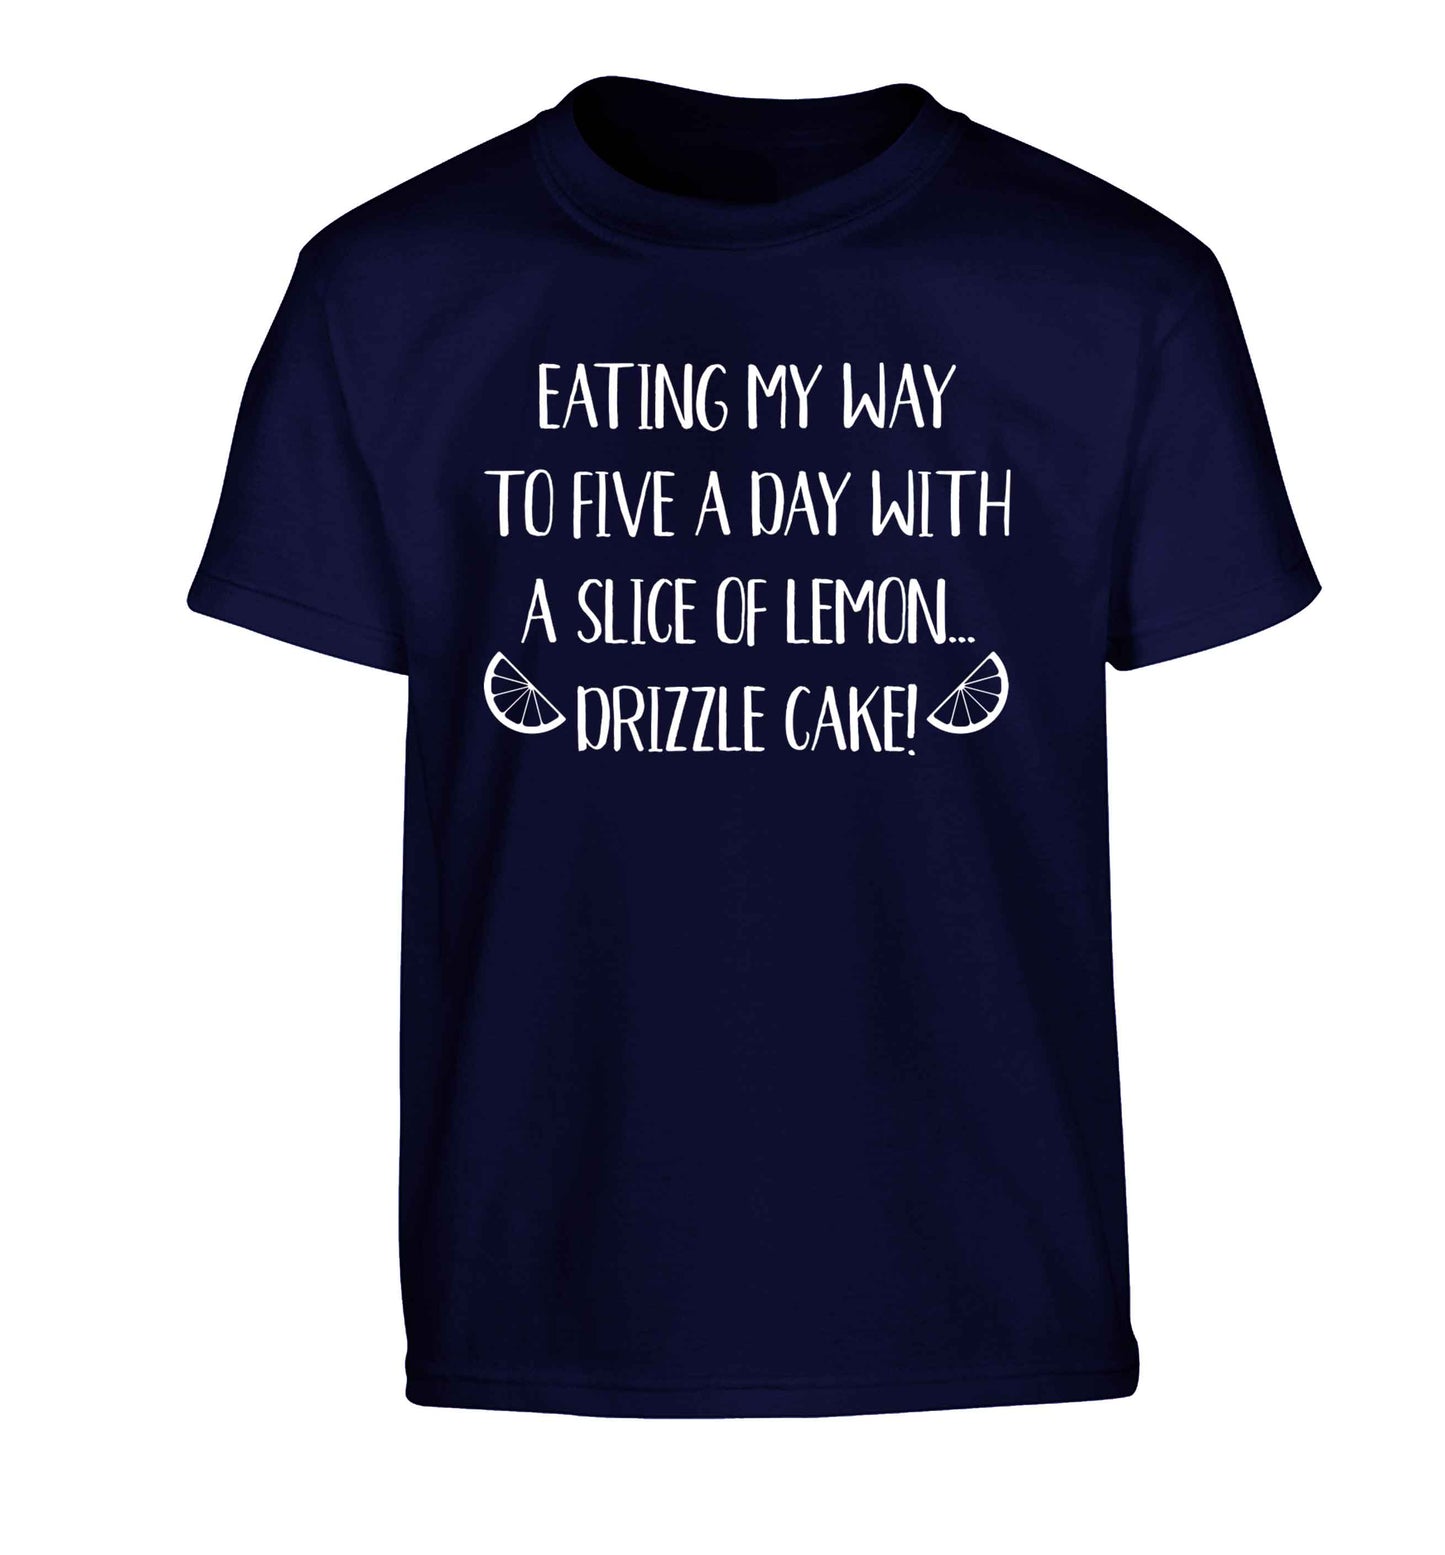 Eating my way to five a day with a slice of lemon drizzle cake day Children's navy Tshirt 12-13 Years